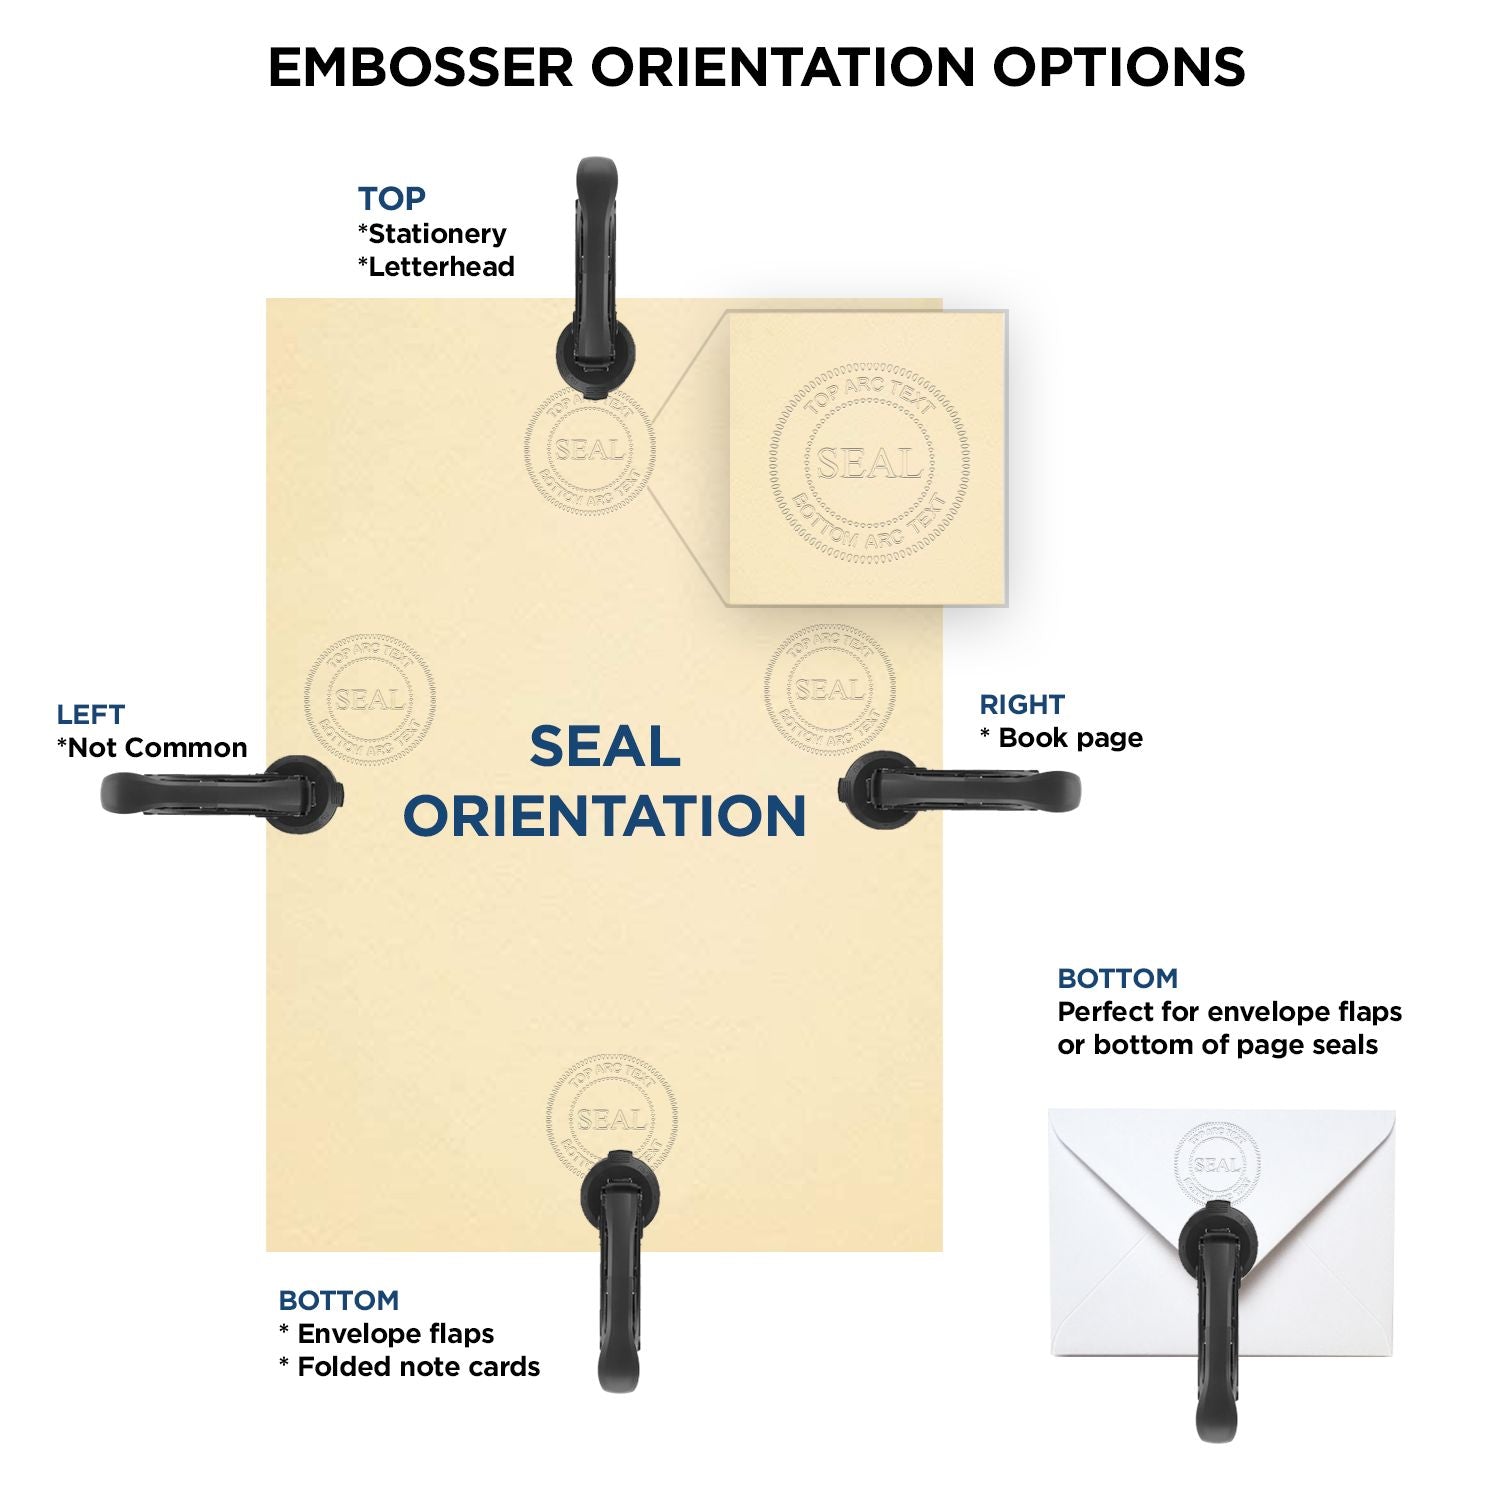 An infographic for the Long Reach New Mexico Land Surveyor Seal showing embosser orientation, this is showing examples of a top, bottom, right and left insert.